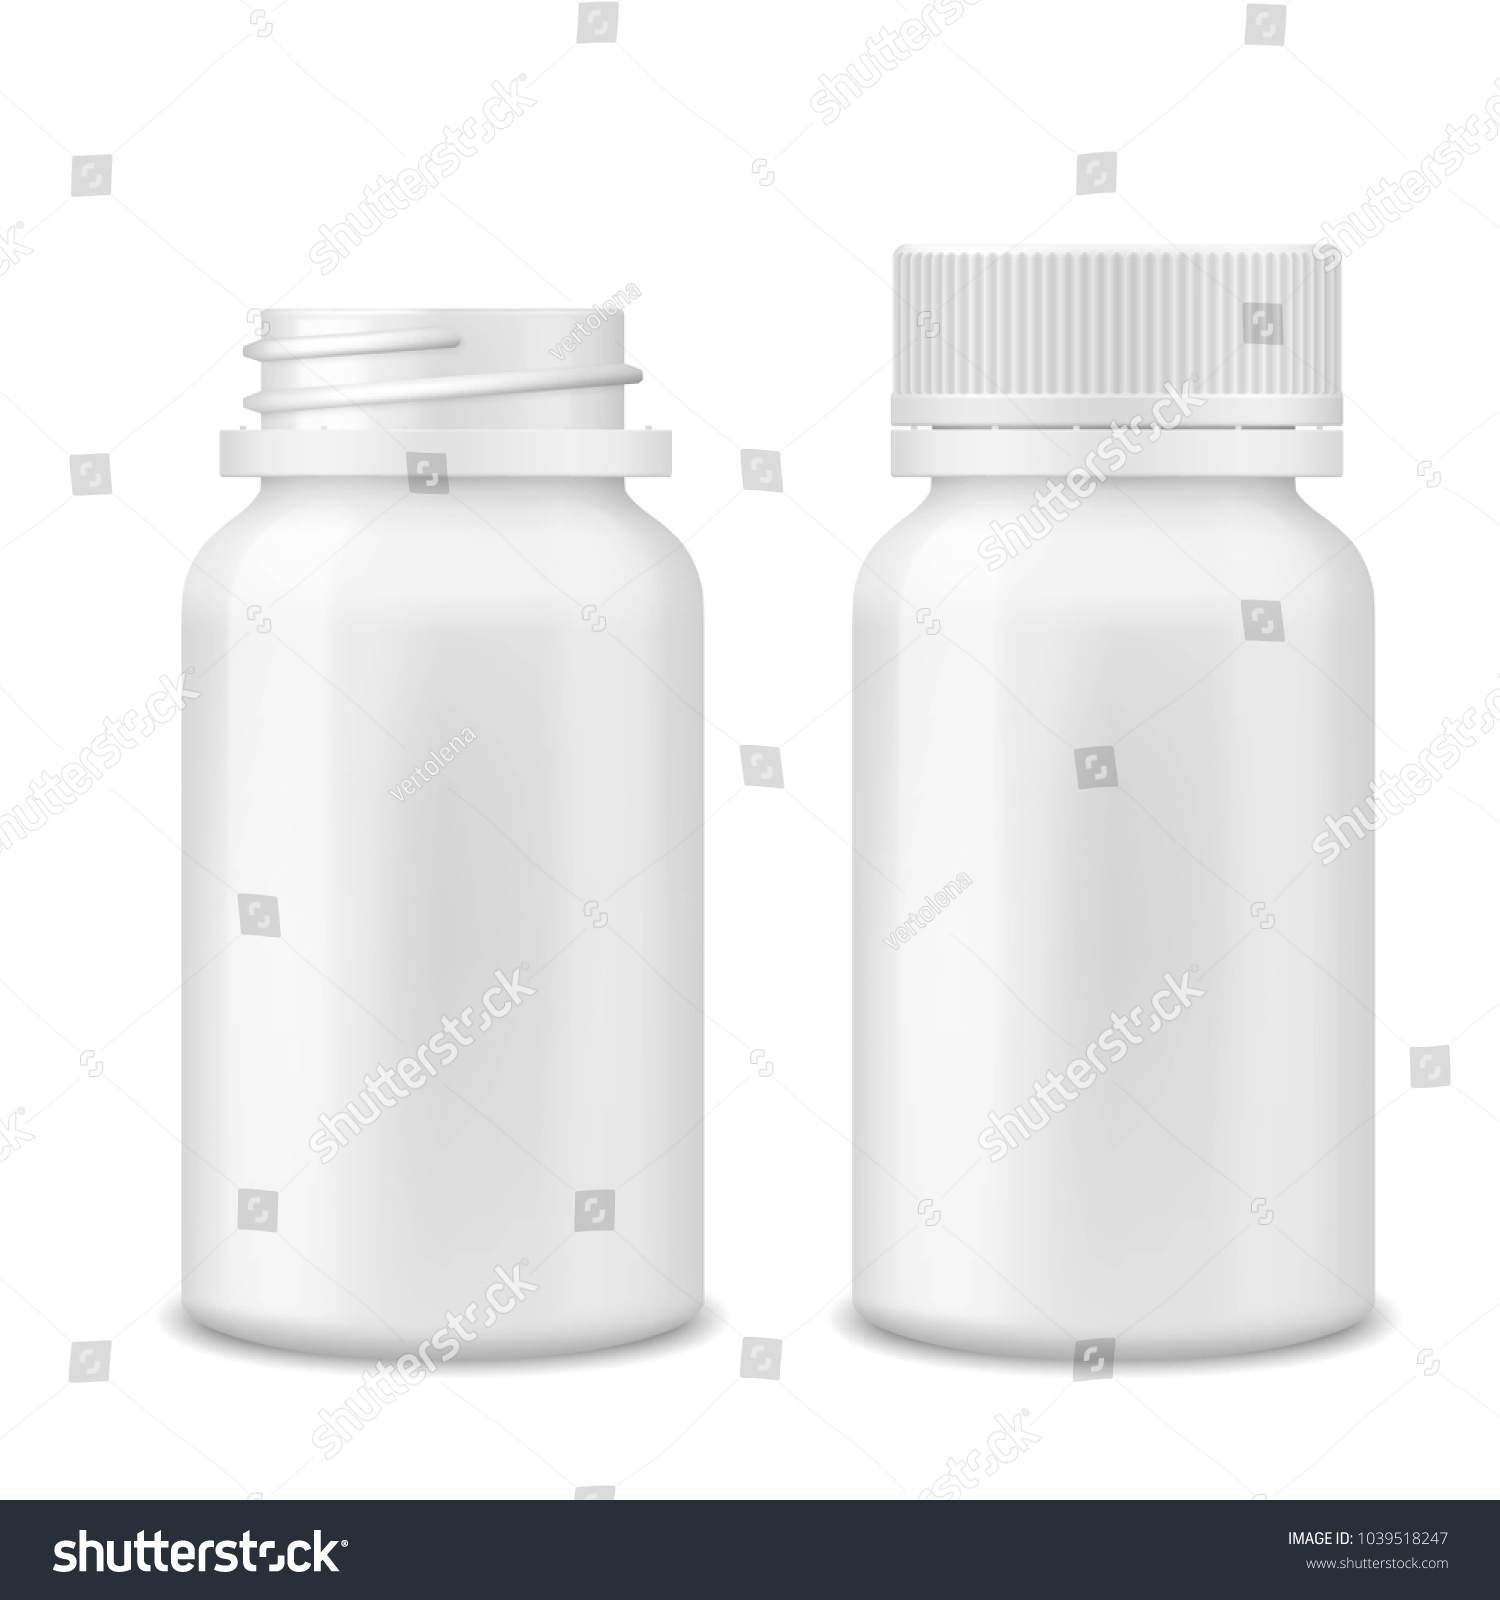 SVG of Realistic vector Blank Medicine opened and closed medical plastic bottle with tablets pills, tablets, drug of painkillers, antibiotics, vitamins Isolated on White Background. Health care medical svg